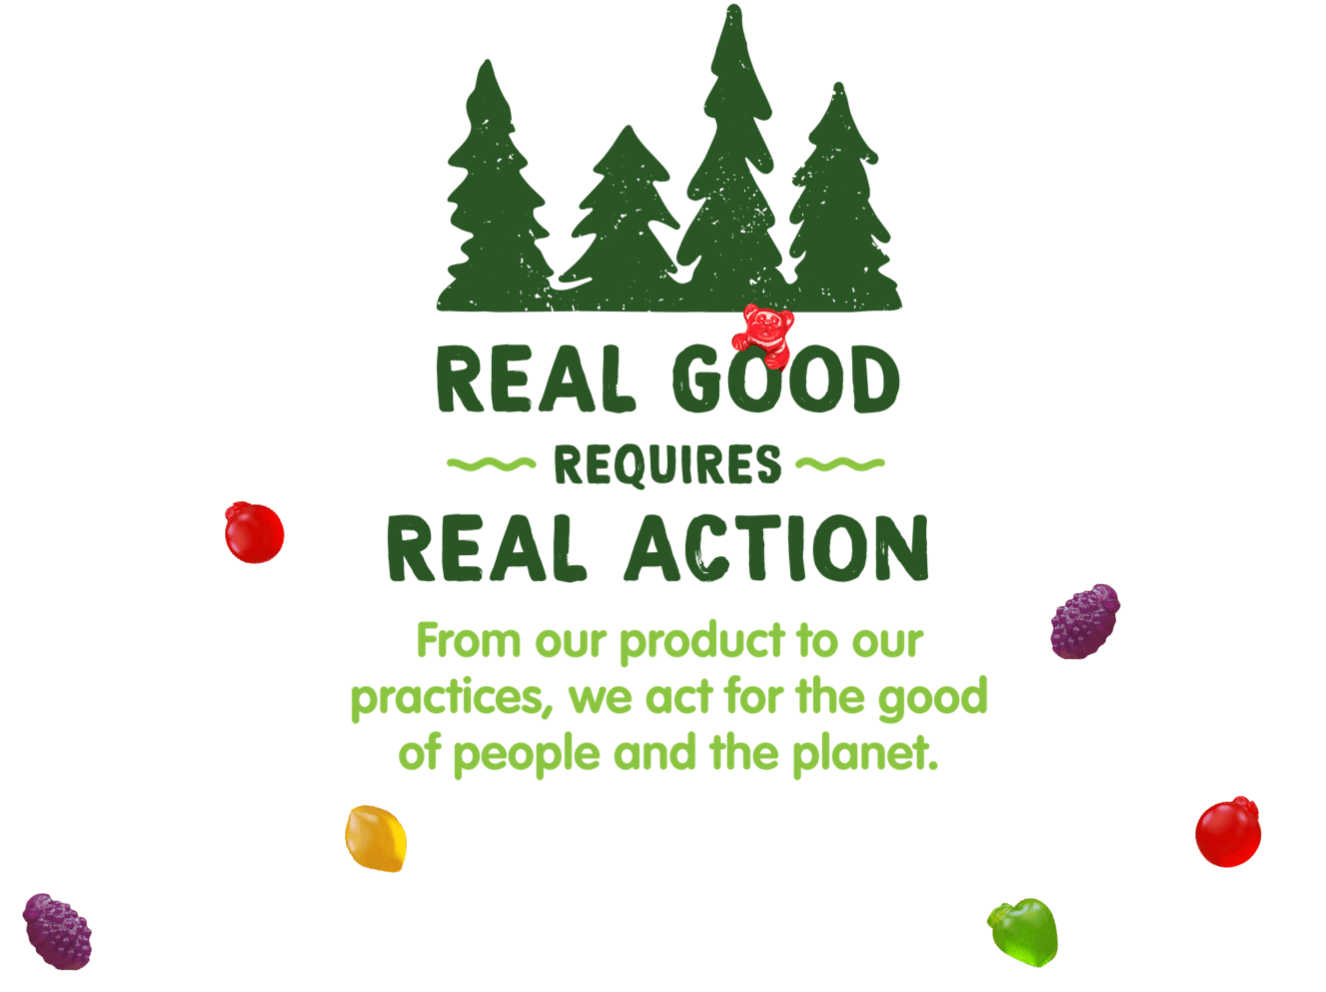 Real Good Requires Real Action. From our product to our practices, we act for the good of the people of the planet.